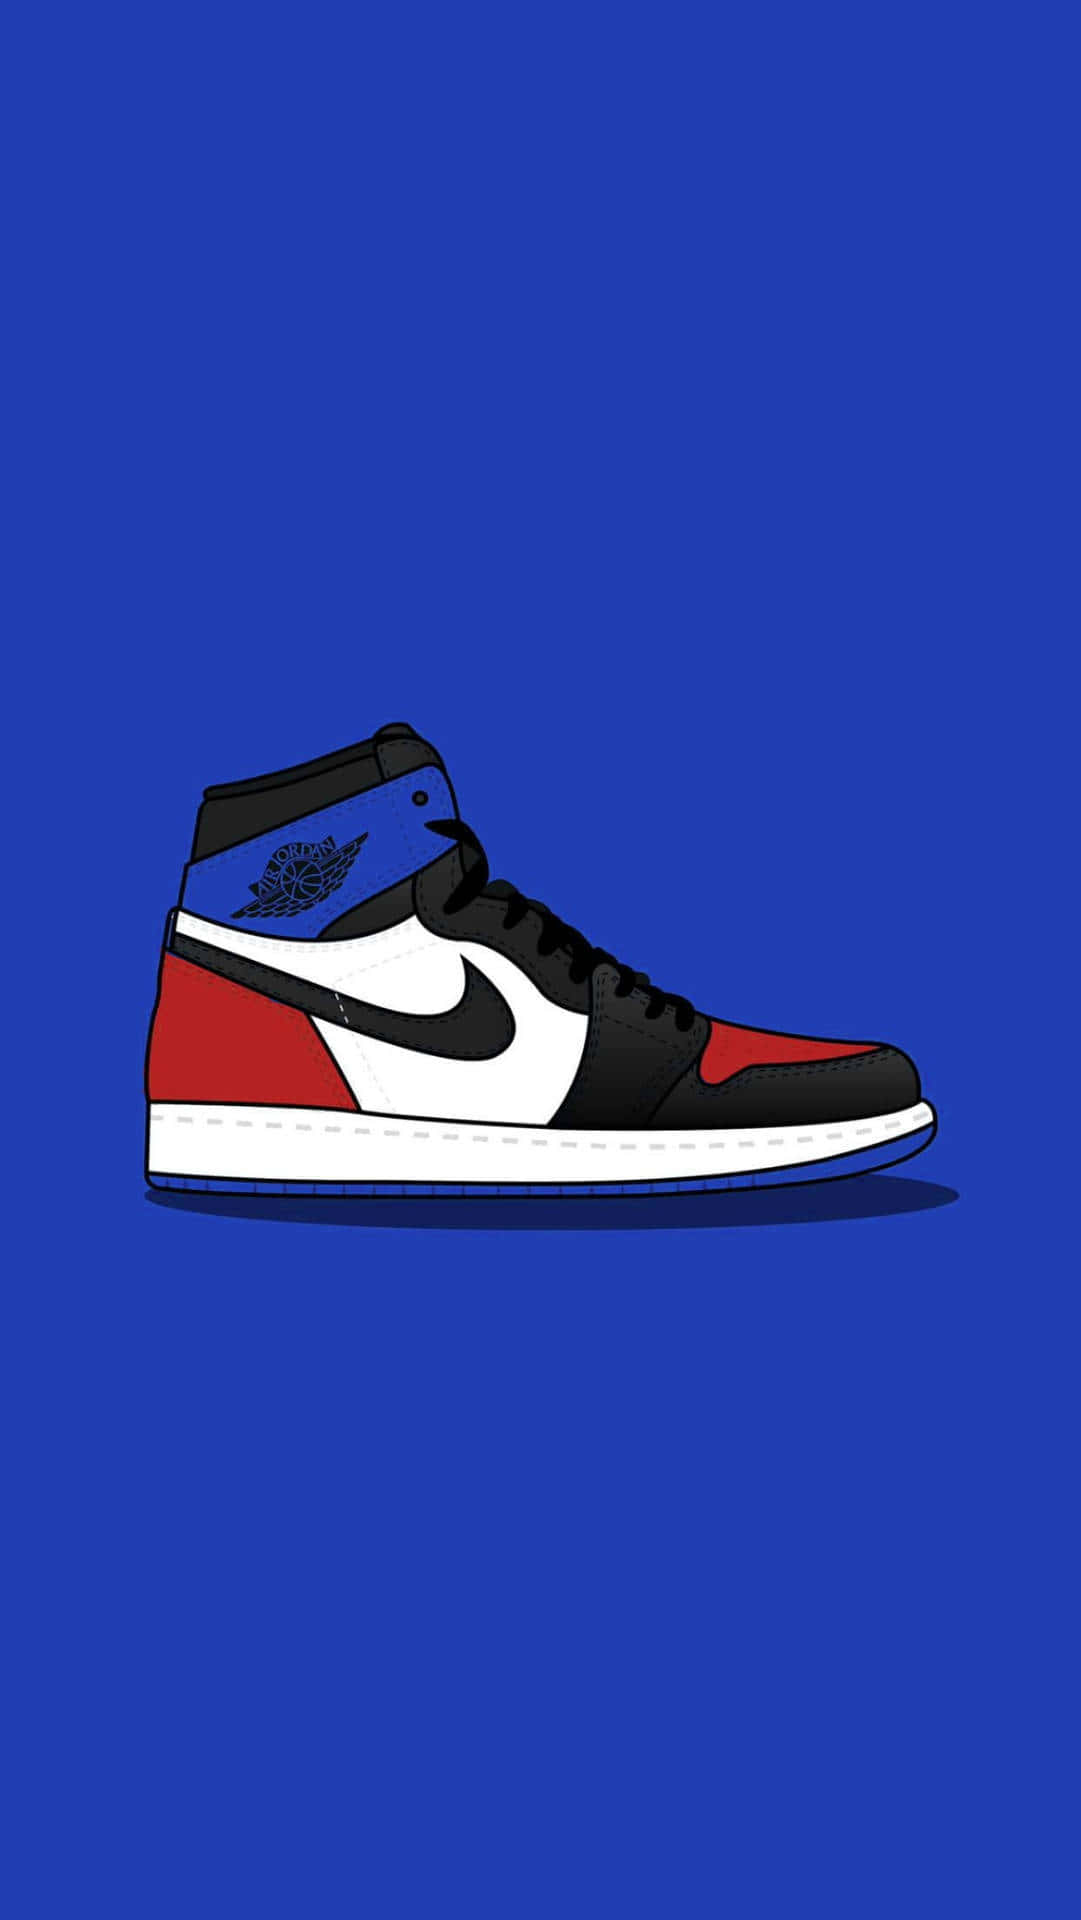 Download Unique Sneaker Collection On Display | Wallpapers.com